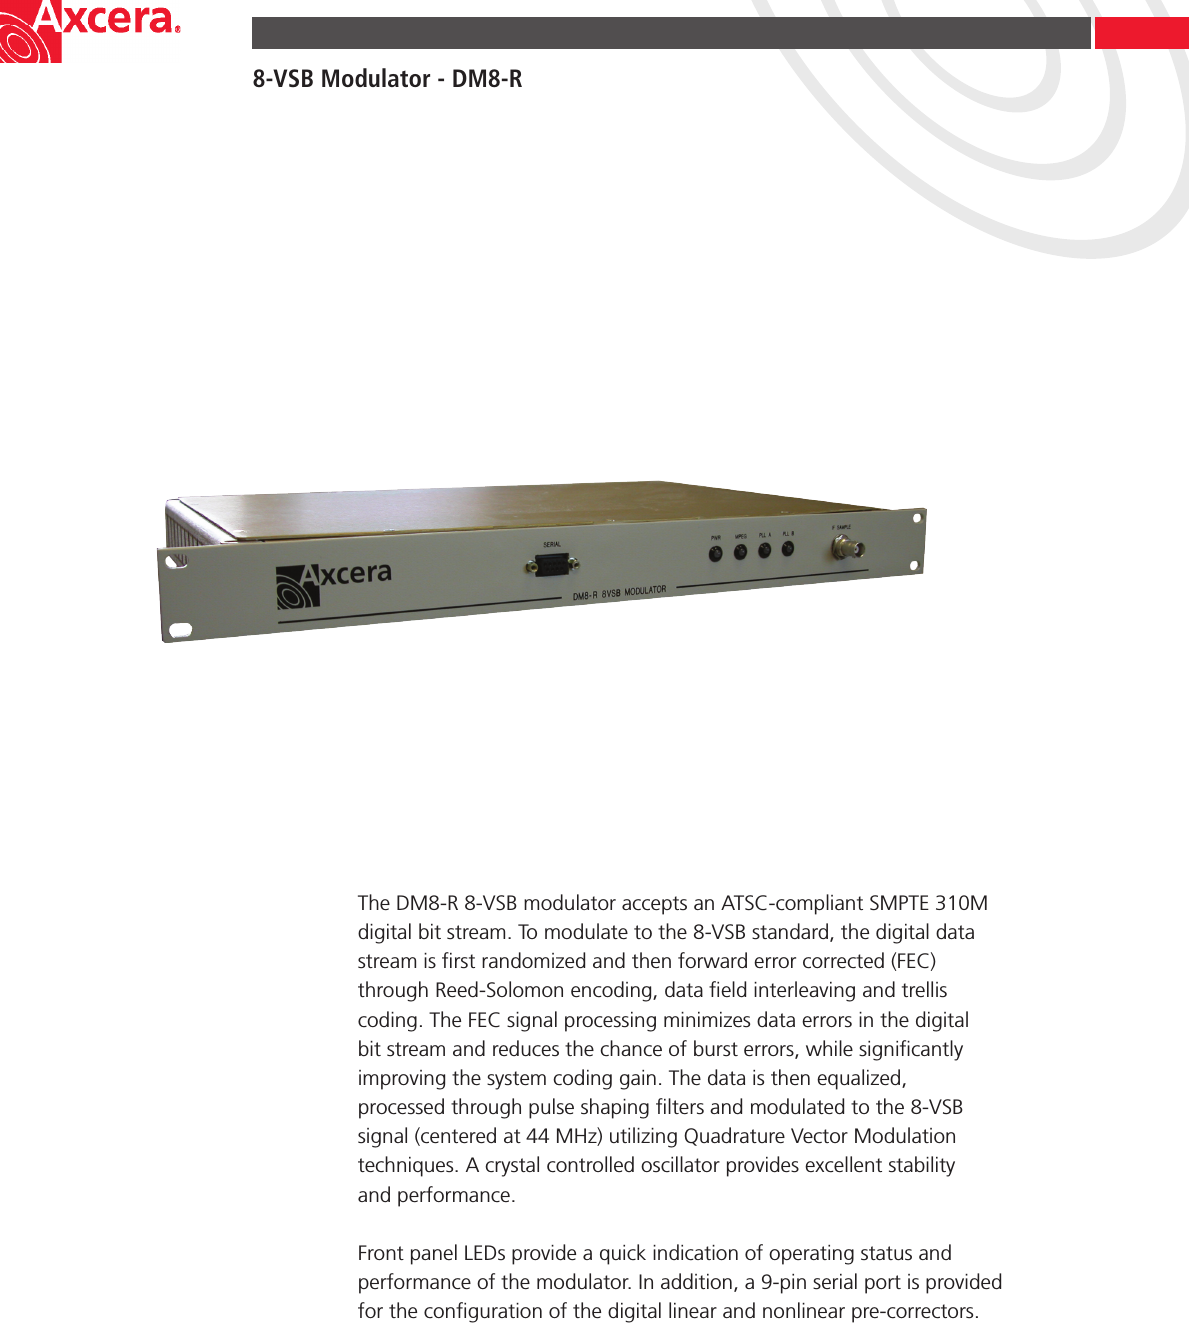 8-VSB Modulator - DM8-RThe DM8-R 8-VSB modulator accepts an ATSC-compliant SMPTE 310M digital bit stream. To modulate to the 8-VSB standard, the digital data stream is ﬁrst randomized and then forward error corrected (FEC) through Reed-Solomon encoding, data ﬁeld interleaving and trellis coding. The FEC signal processing minimizes data errors in the digital bit stream and reduces the chance of burst errors, while signiﬁcantly improving the system coding gain. The data is then equalized, processed through pulse shaping ﬁlters and modulated to the 8-VSB signal (centered at 44 MHz) utilizing Quadrature Vector Modulation techniques. A crystal controlled oscillator provides excellent stability  and performance.Front panel LEDs provide a quick indication of operating status and performance of the modulator. In addition, a 9-pin serial port is provided for the conﬁguration of the digital linear and nonlinear pre-correctors.